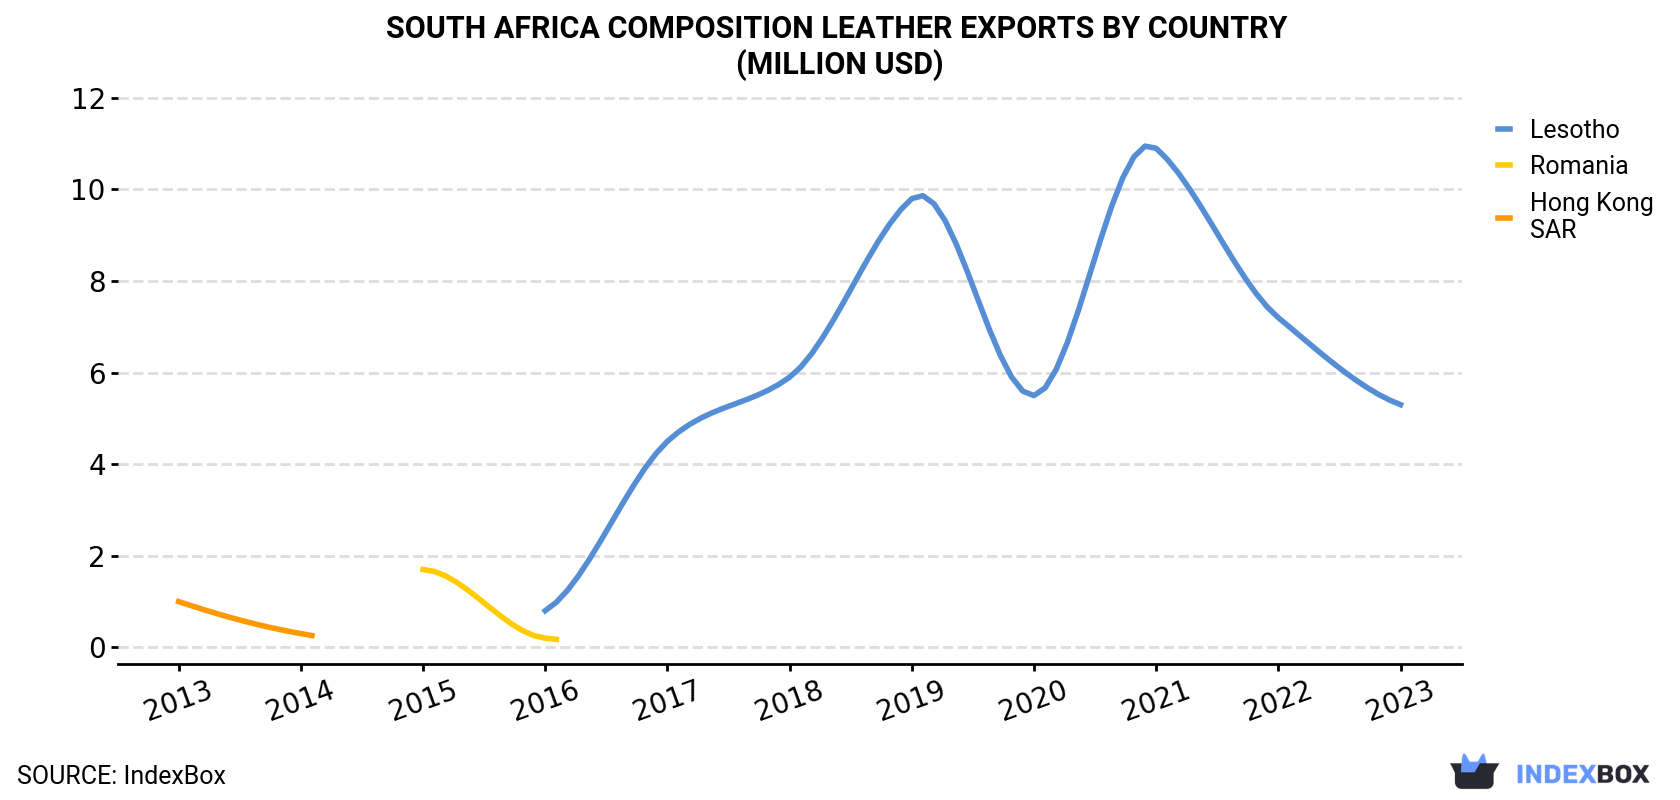 South Africa Composition Leather Exports By Country (Million USD)